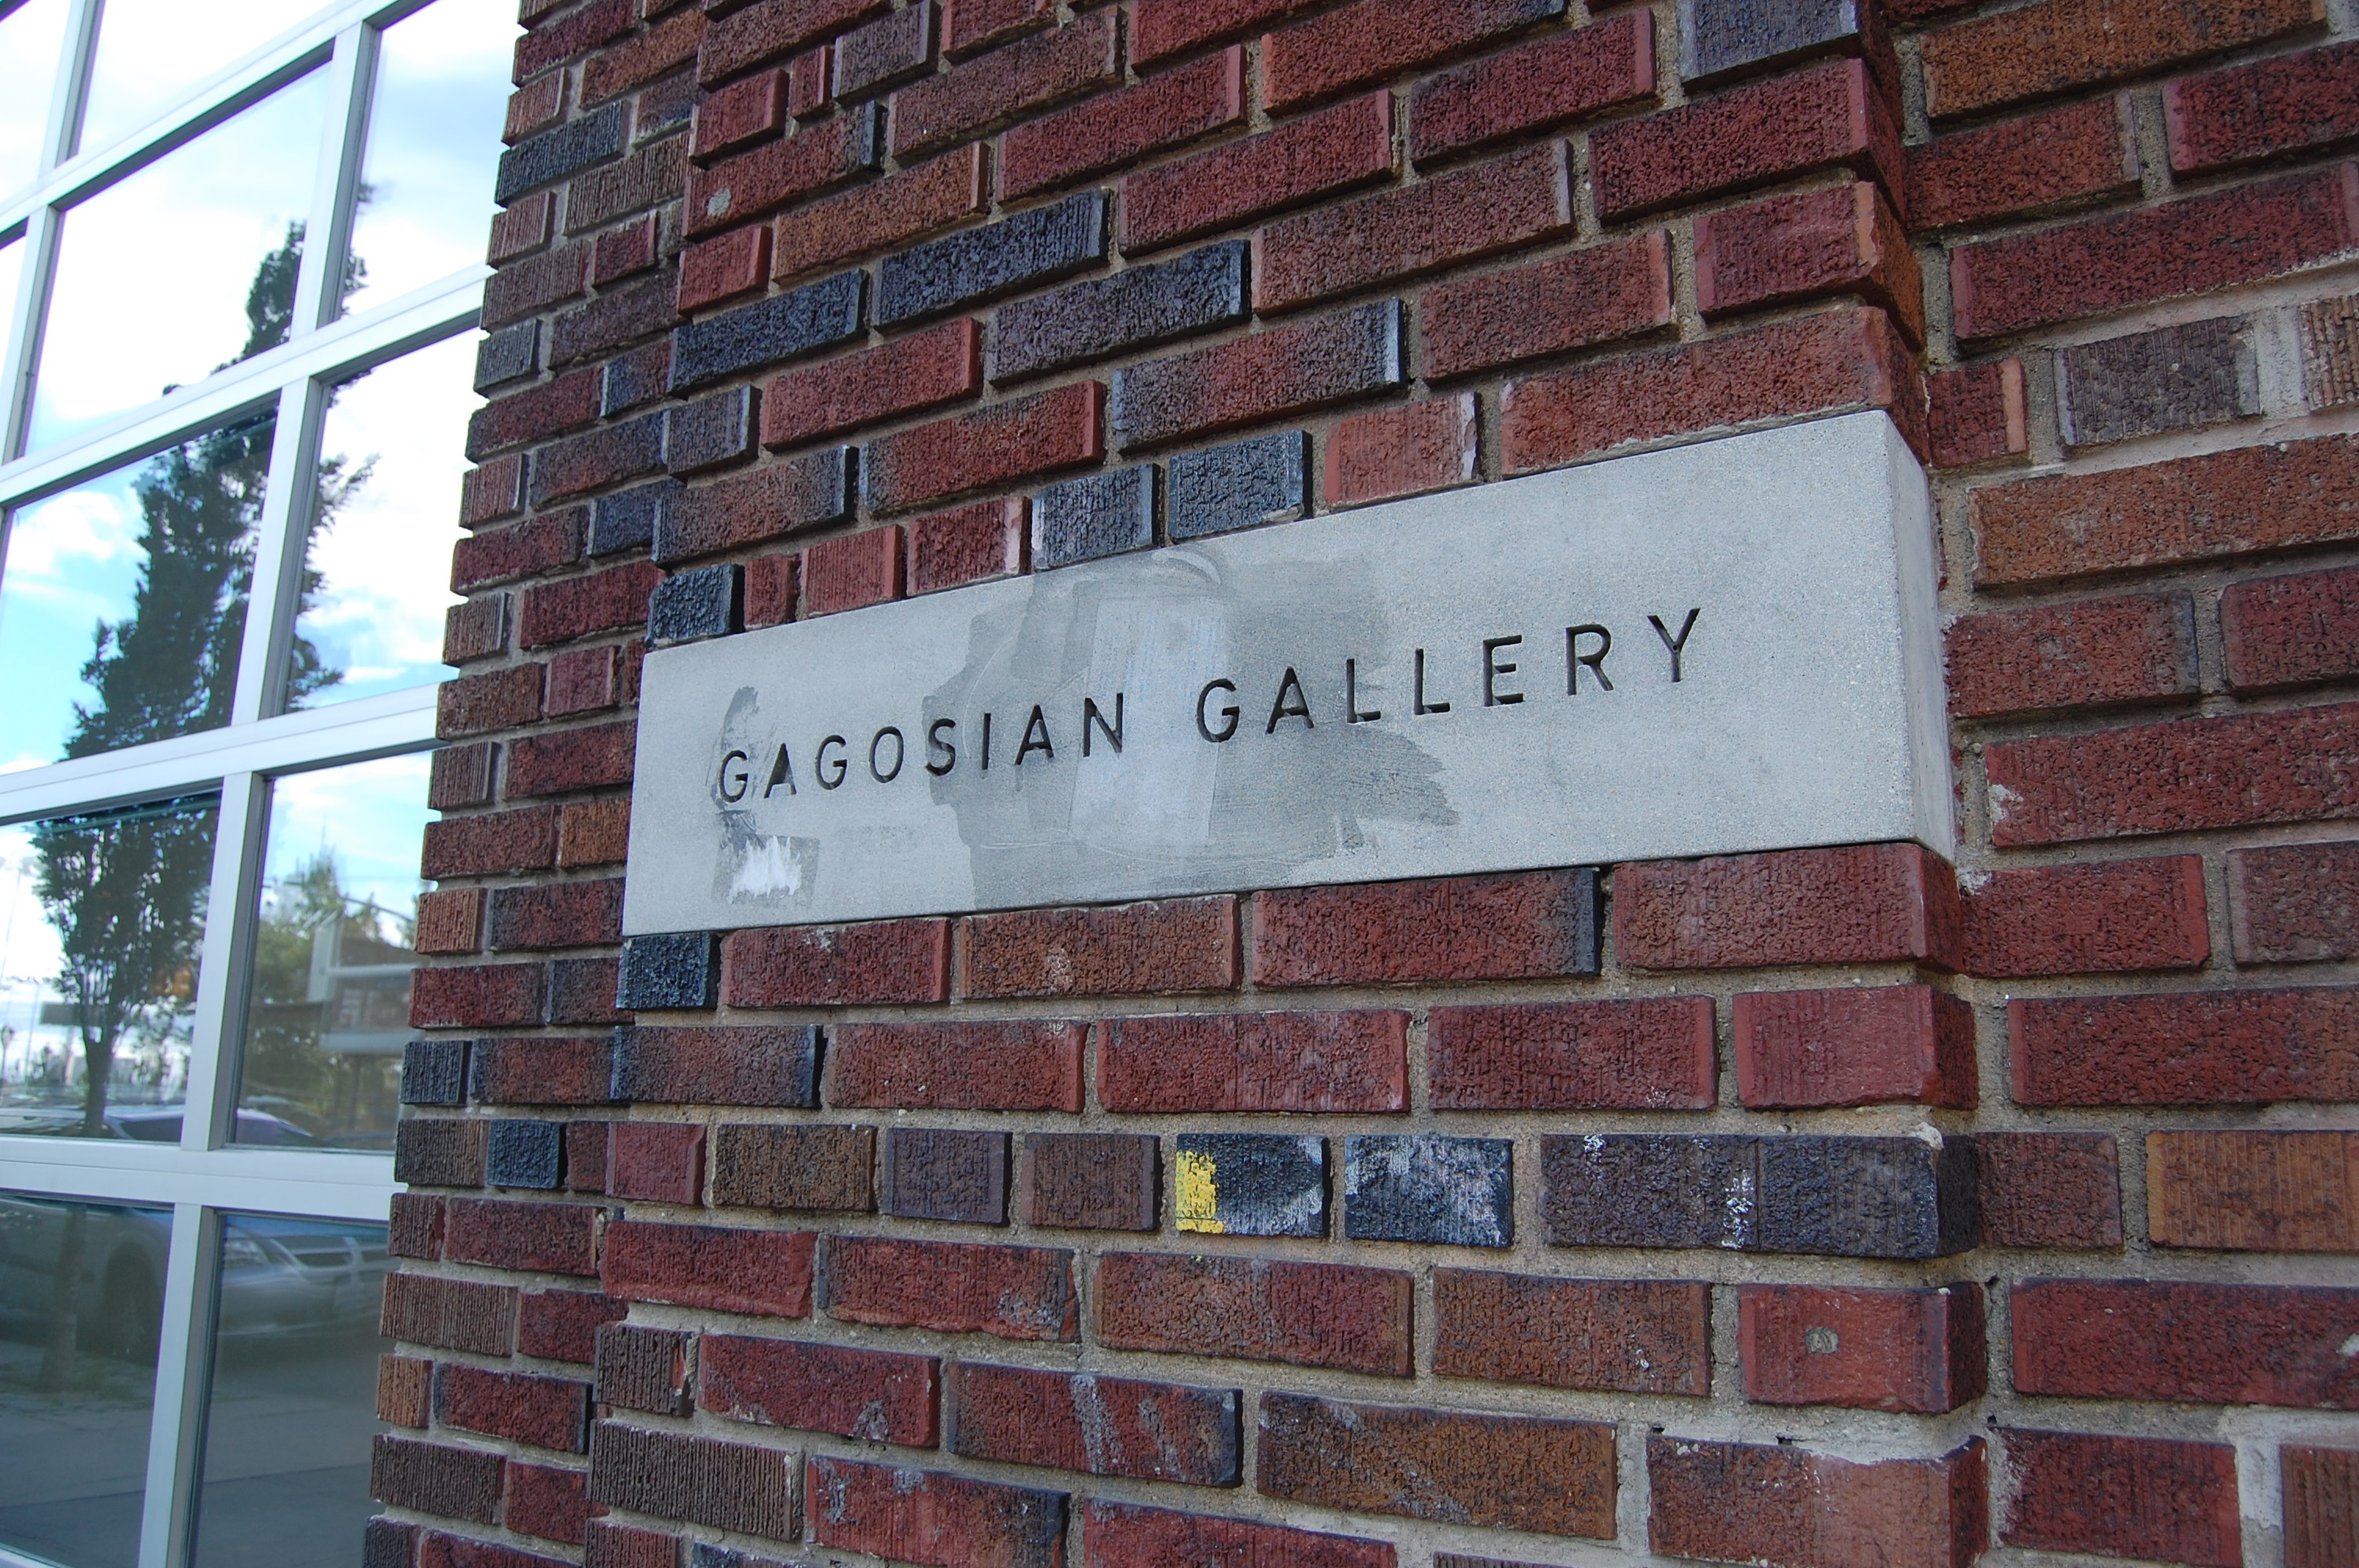 One of many Gagosian Galleries.